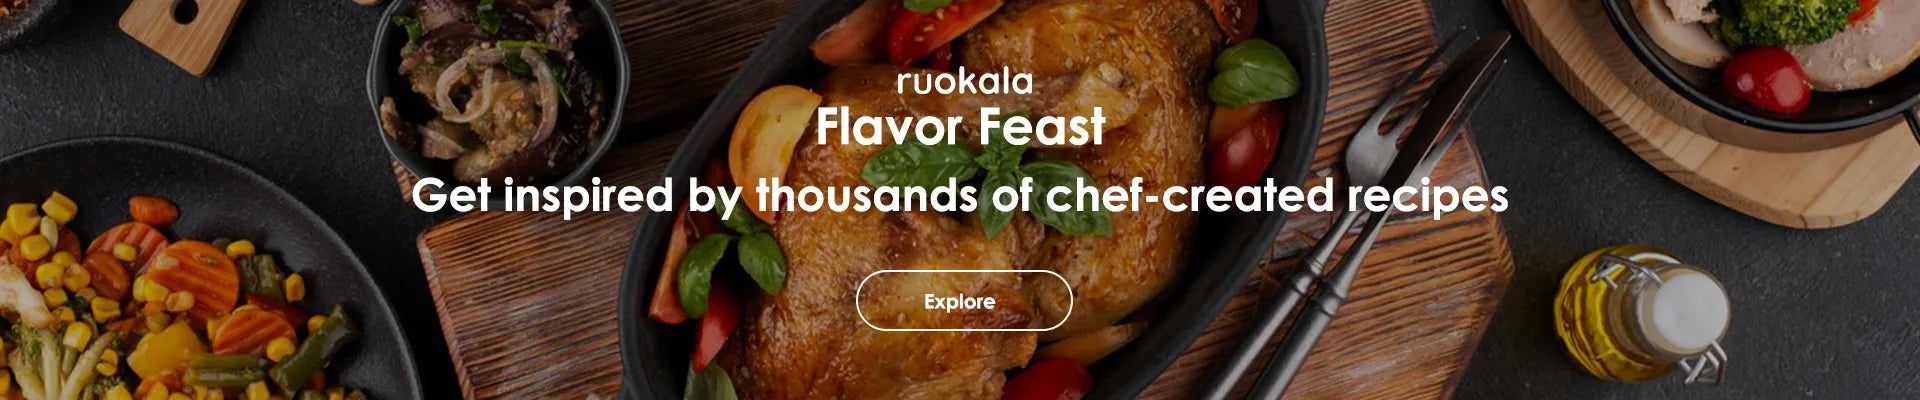 Ruokala flavor feast with roasted chicken and fresh herbs